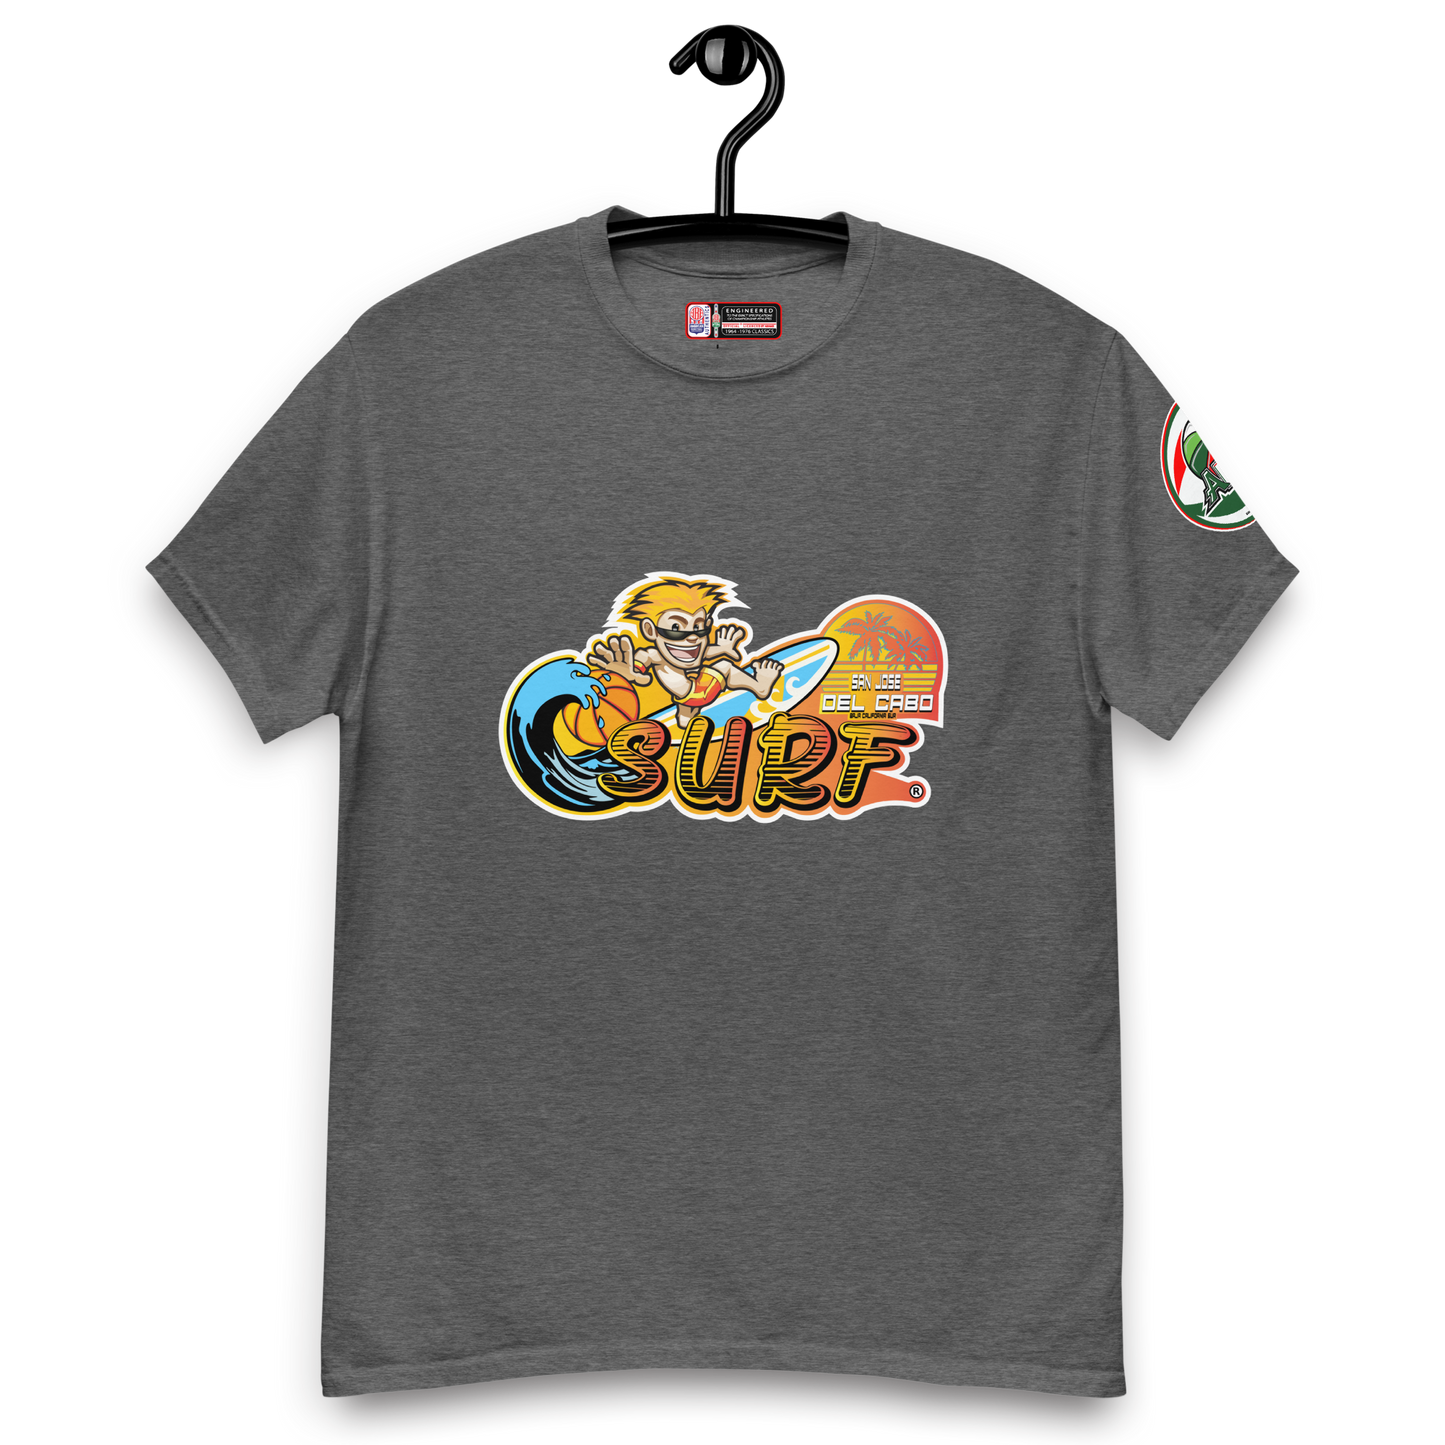 "Surf in Style: San Jose Surf Basketball Team T-Shirt Collection"